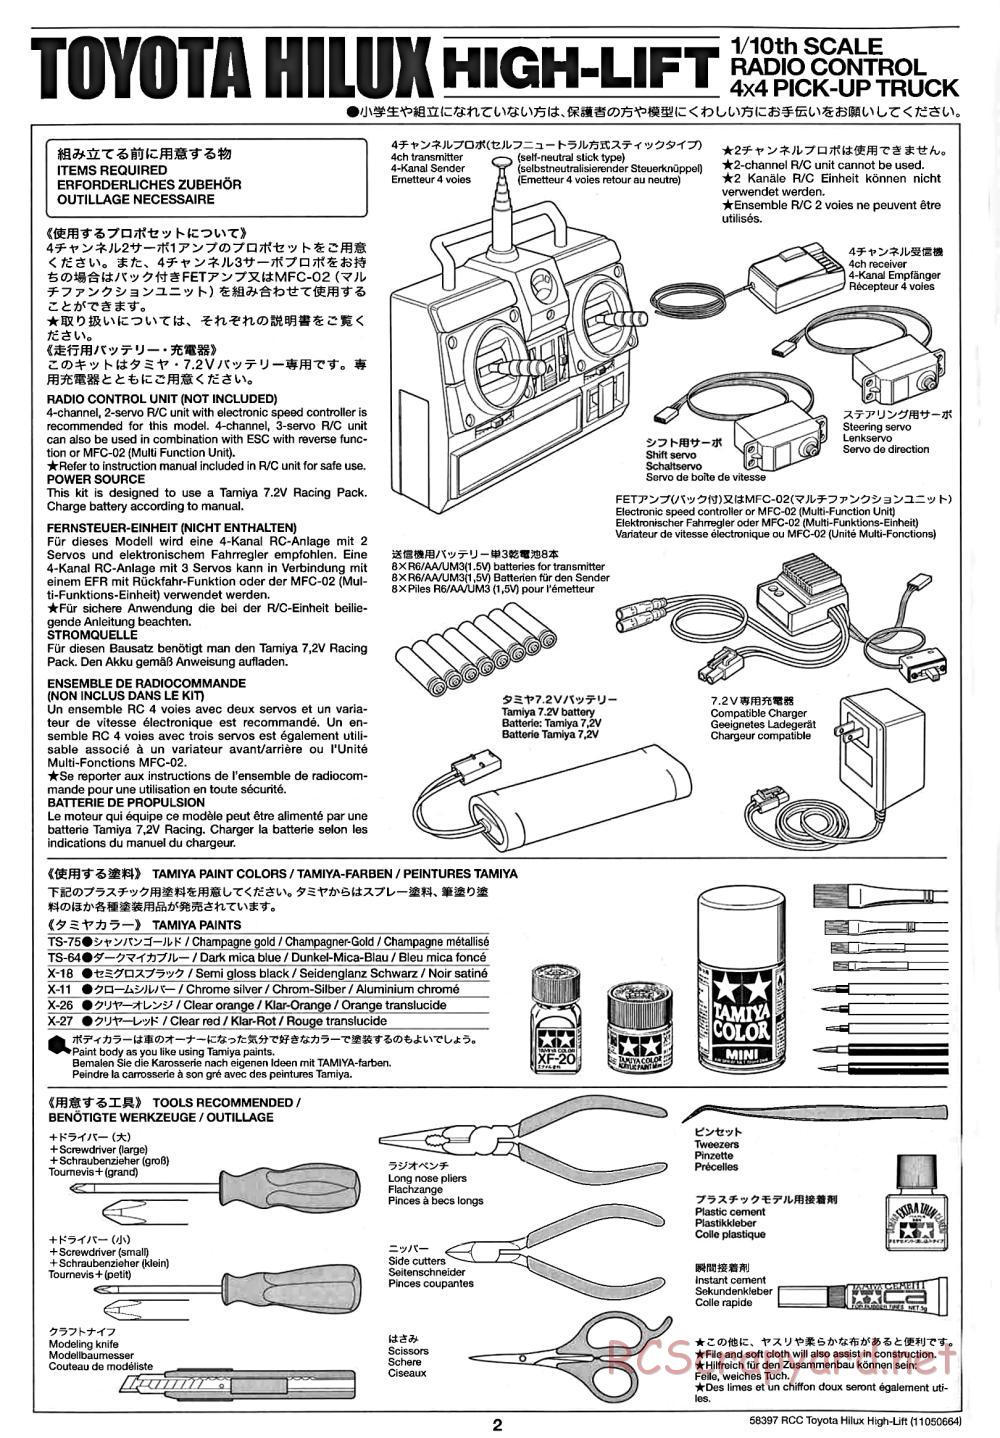 Tamiya - Toyota Hilux High-Lift Chassis - Manual - Page 2